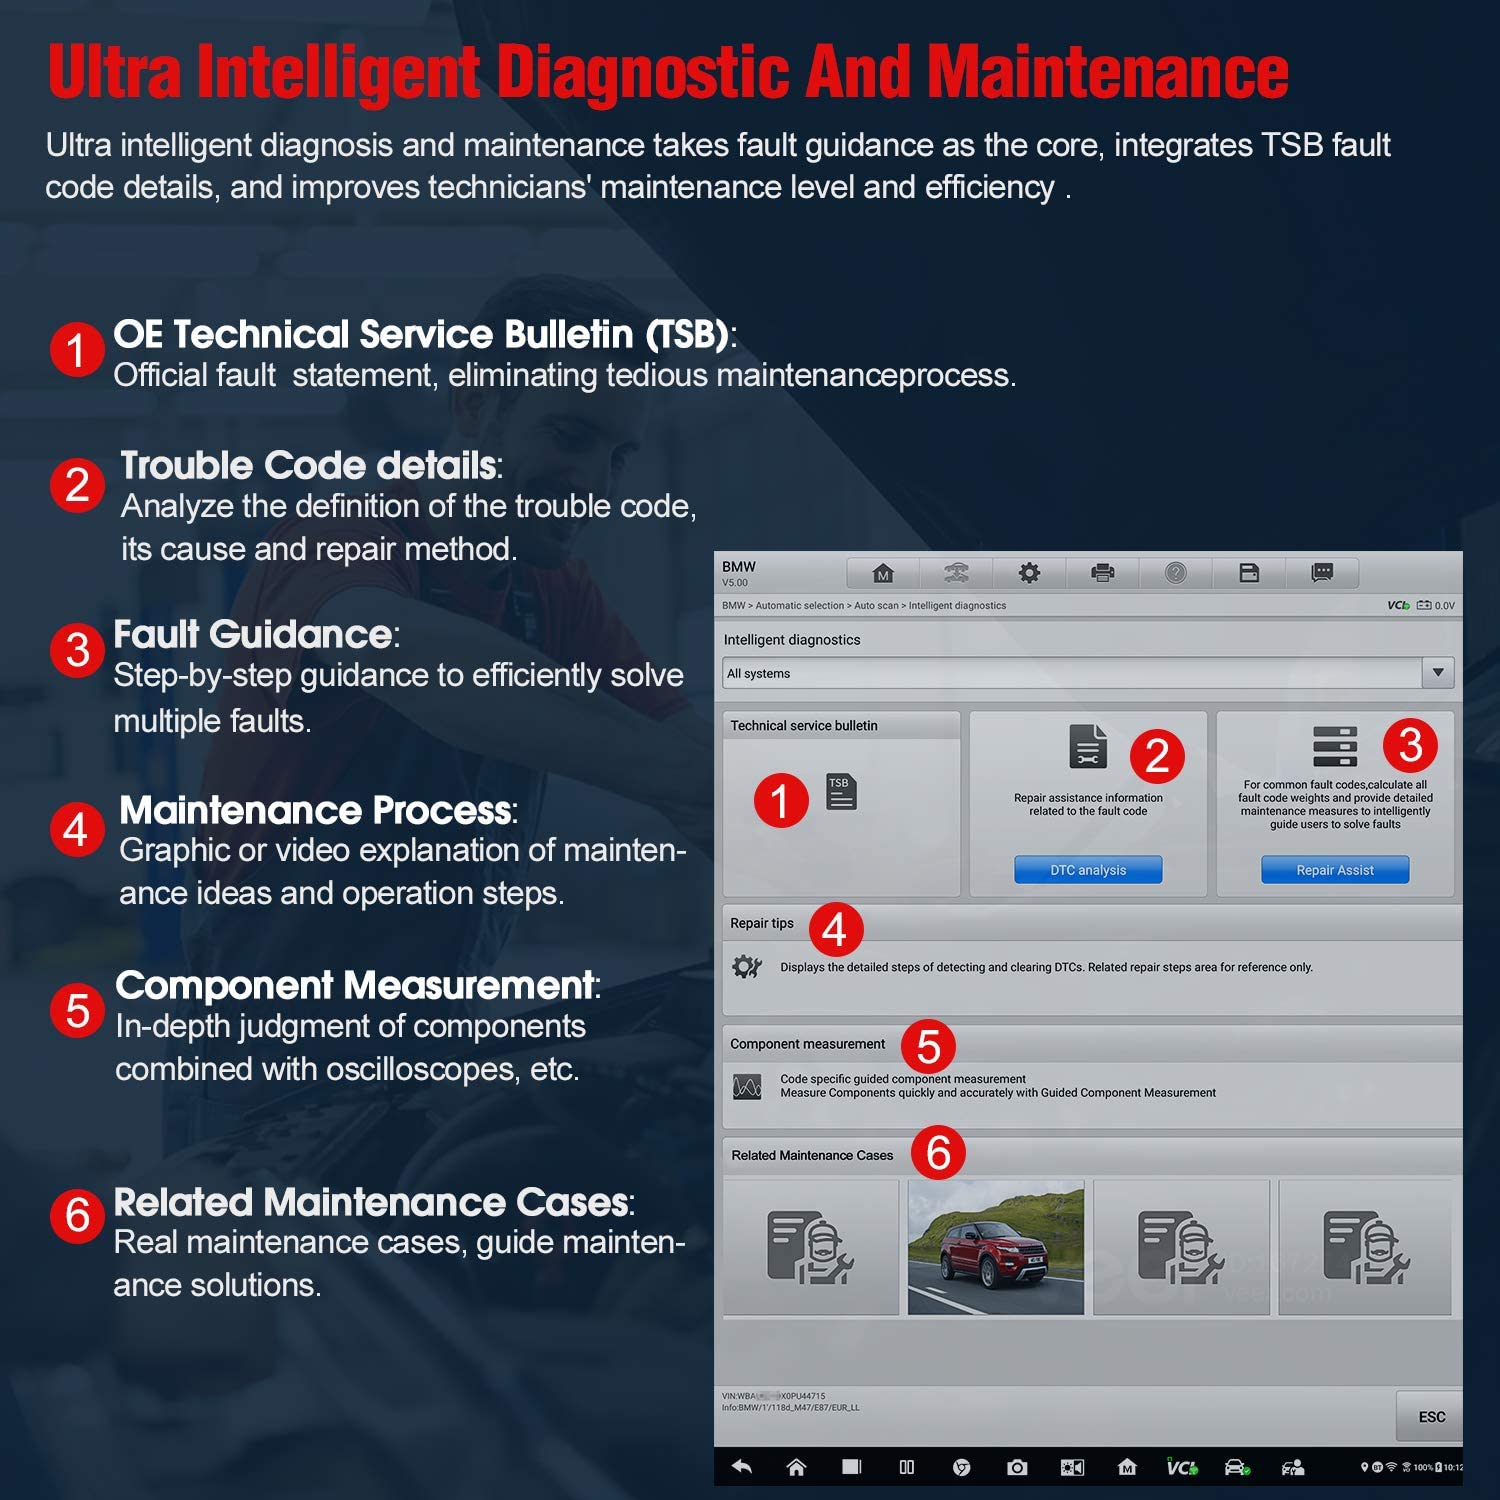 Autel MaxiSys Ultra is 2Years Free Update-Upgraded MS908S Pro/Elite/MS909/MS919